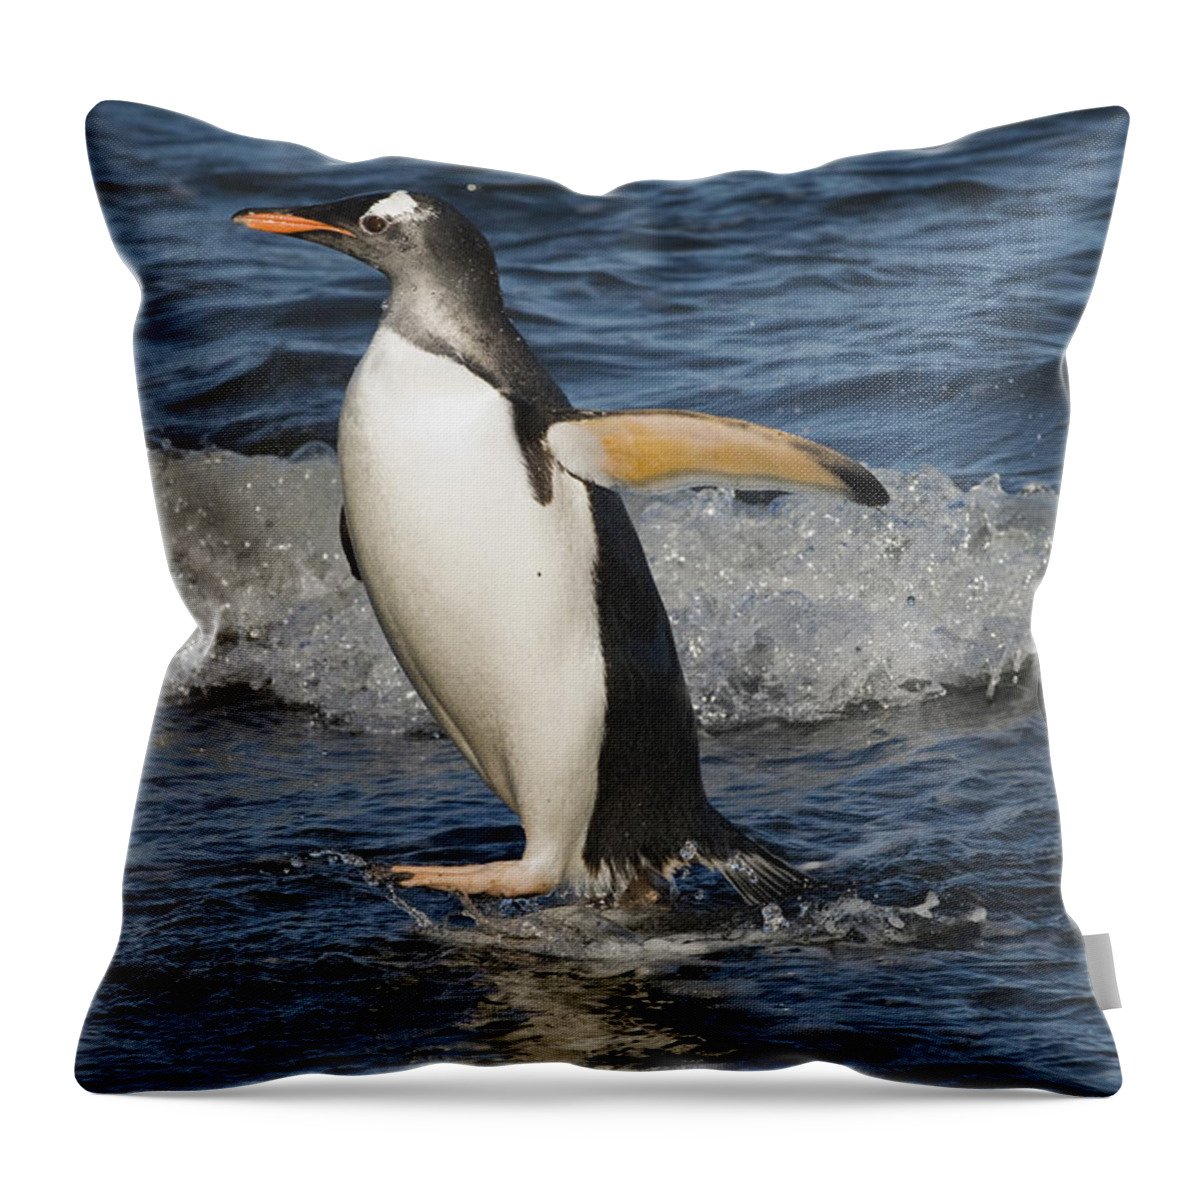 00429479 Throw Pillow featuring the photograph Gentoo Penguin Coming Ashore South by Flip Nicklin